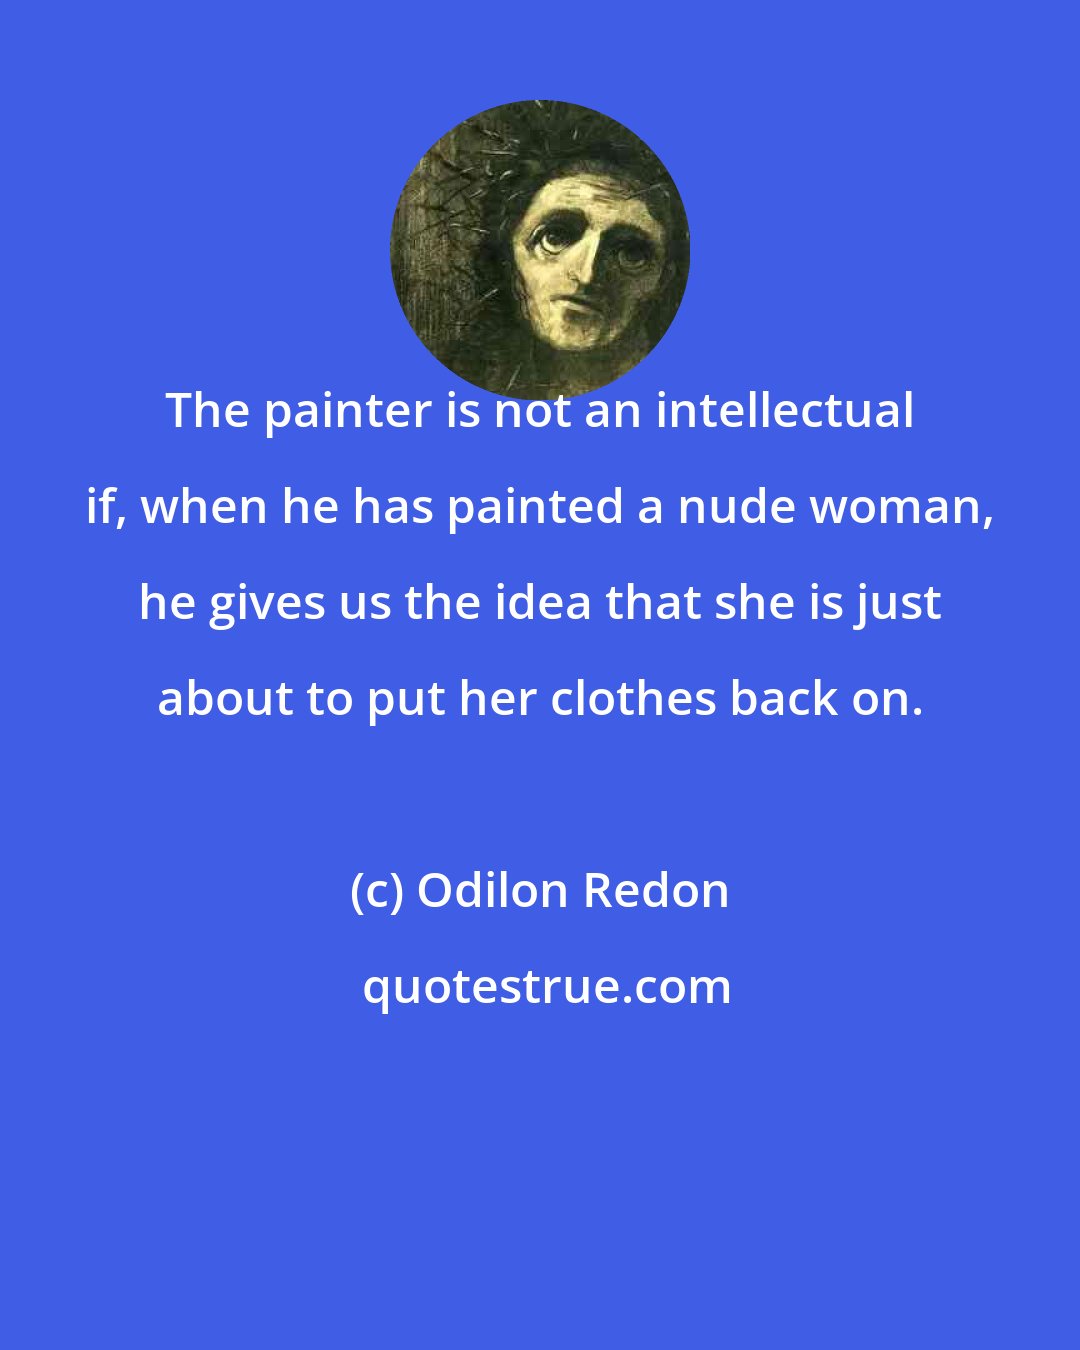 Odilon Redon: The painter is not an intellectual if, when he has painted a nude woman, he gives us the idea that she is just about to put her clothes back on.